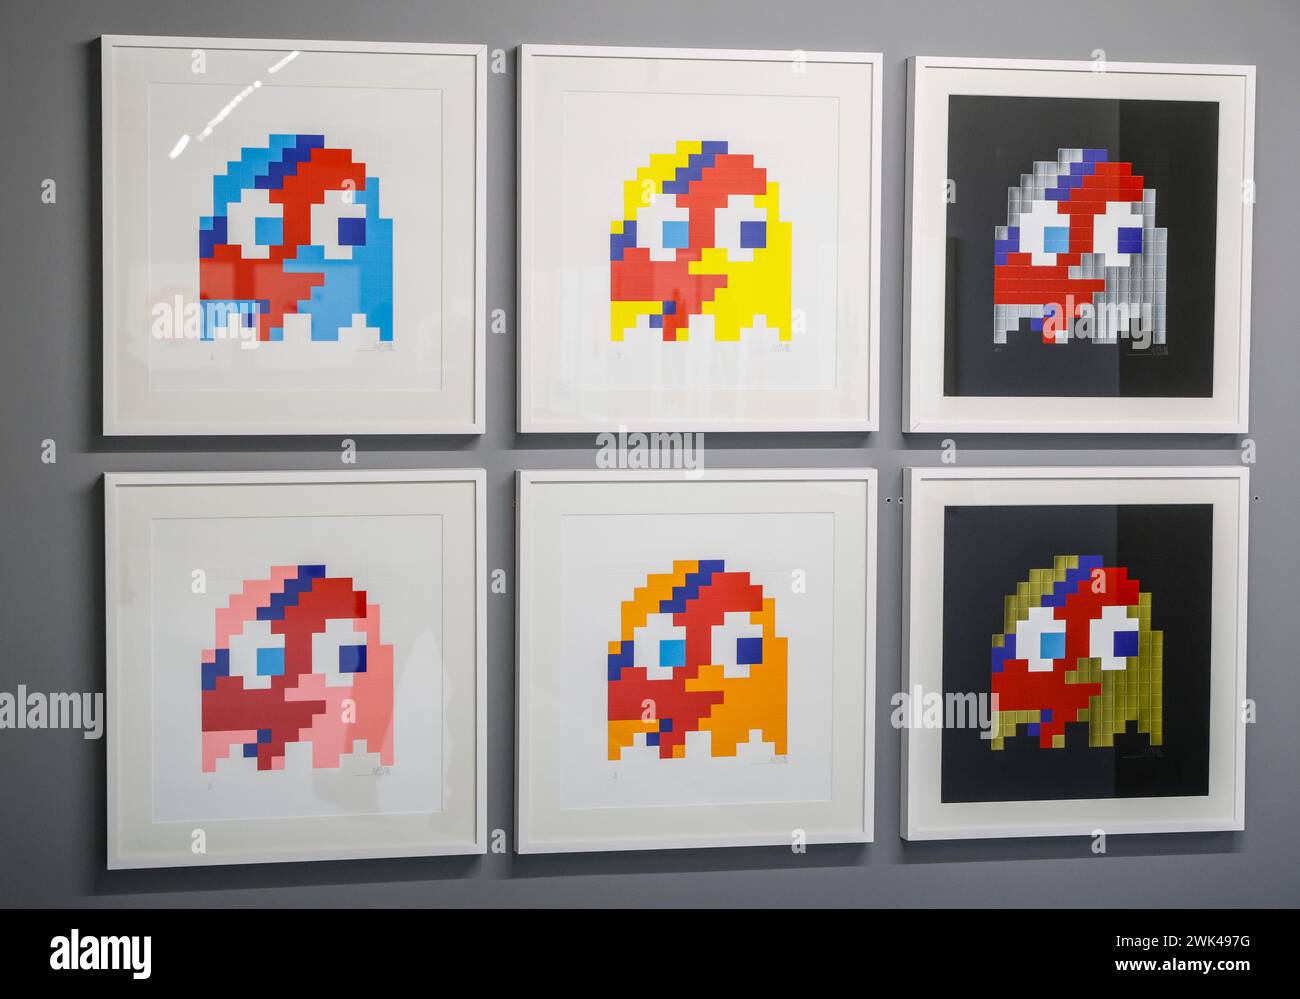 INVADER S SPACE STATION A MIND BLOWING EXHIBITION IN PARIS Stock Photo